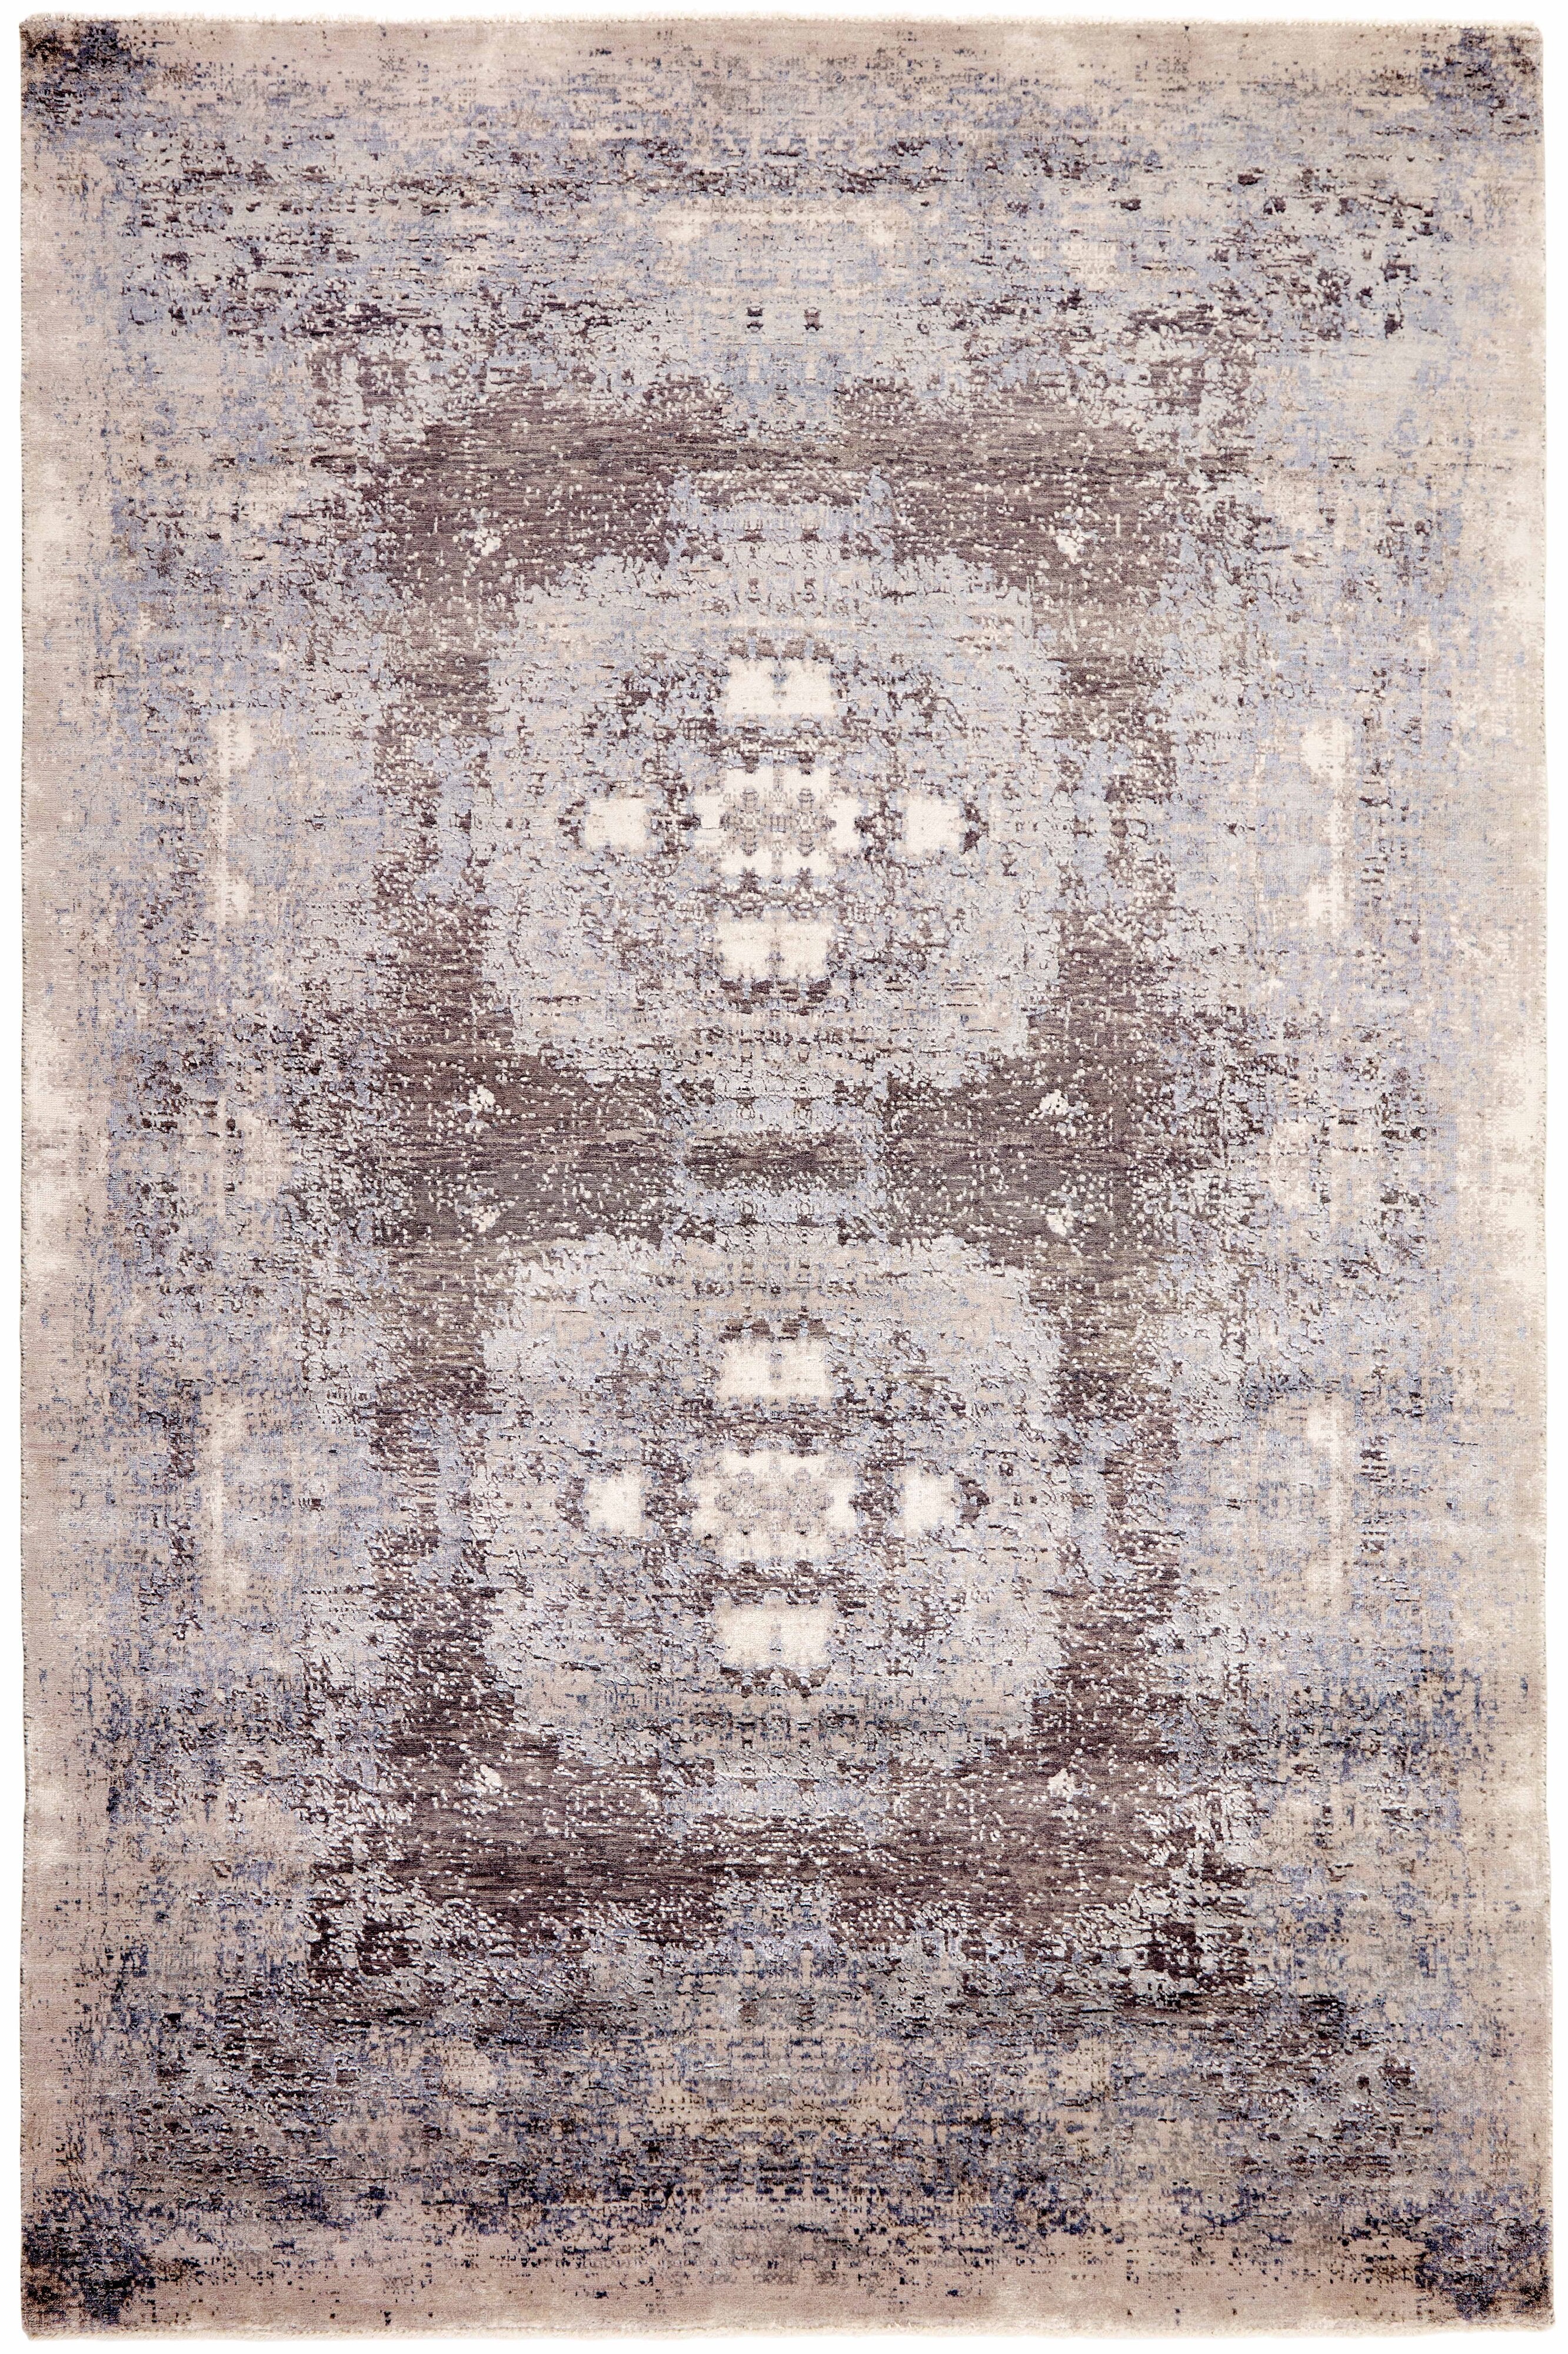 Large area rug with abstract design in beige, blue, brown and grey